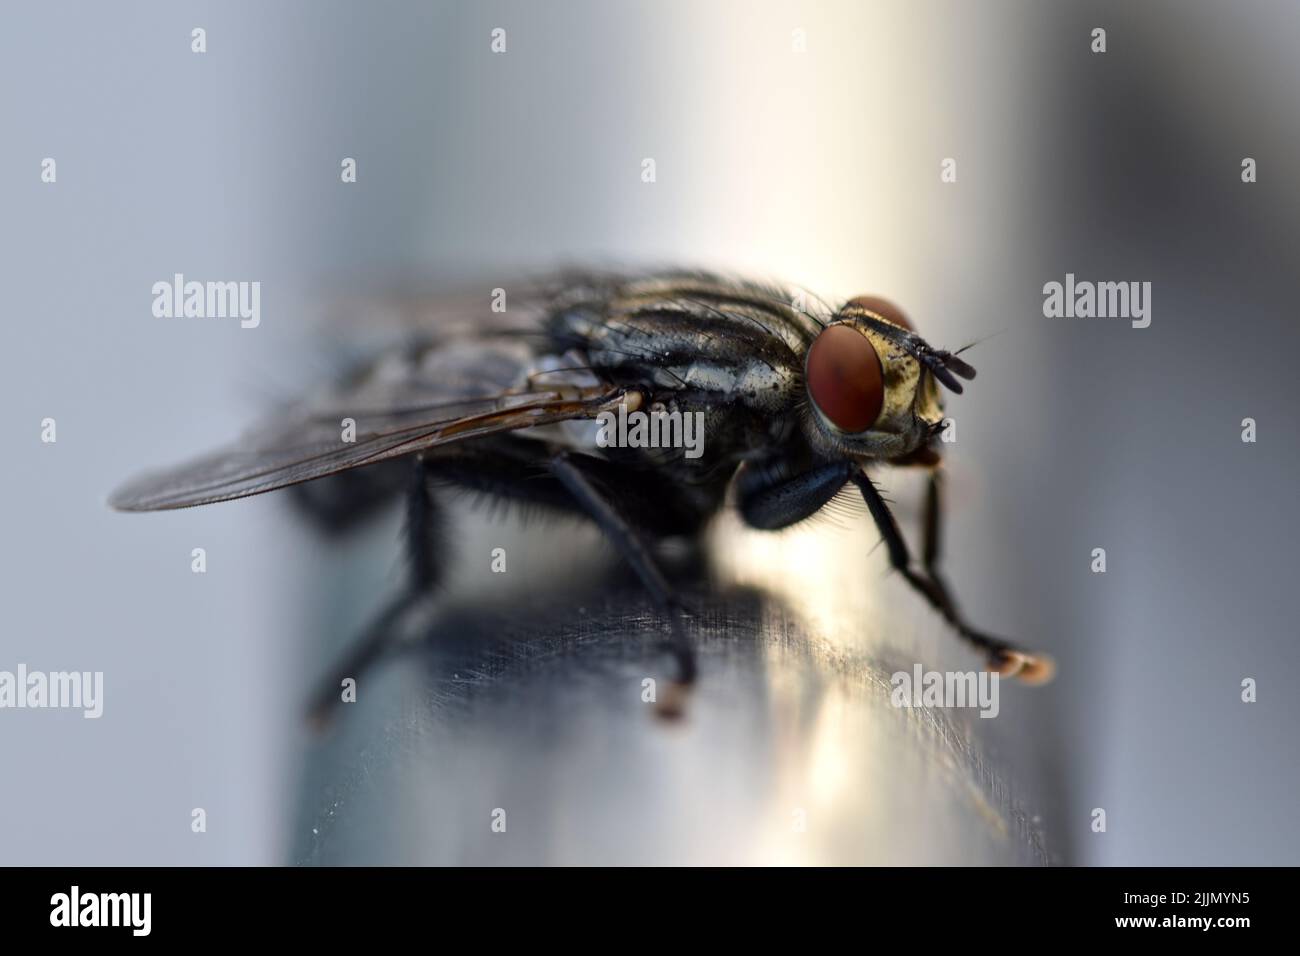 A closeup of housefly on metal Stock Photo